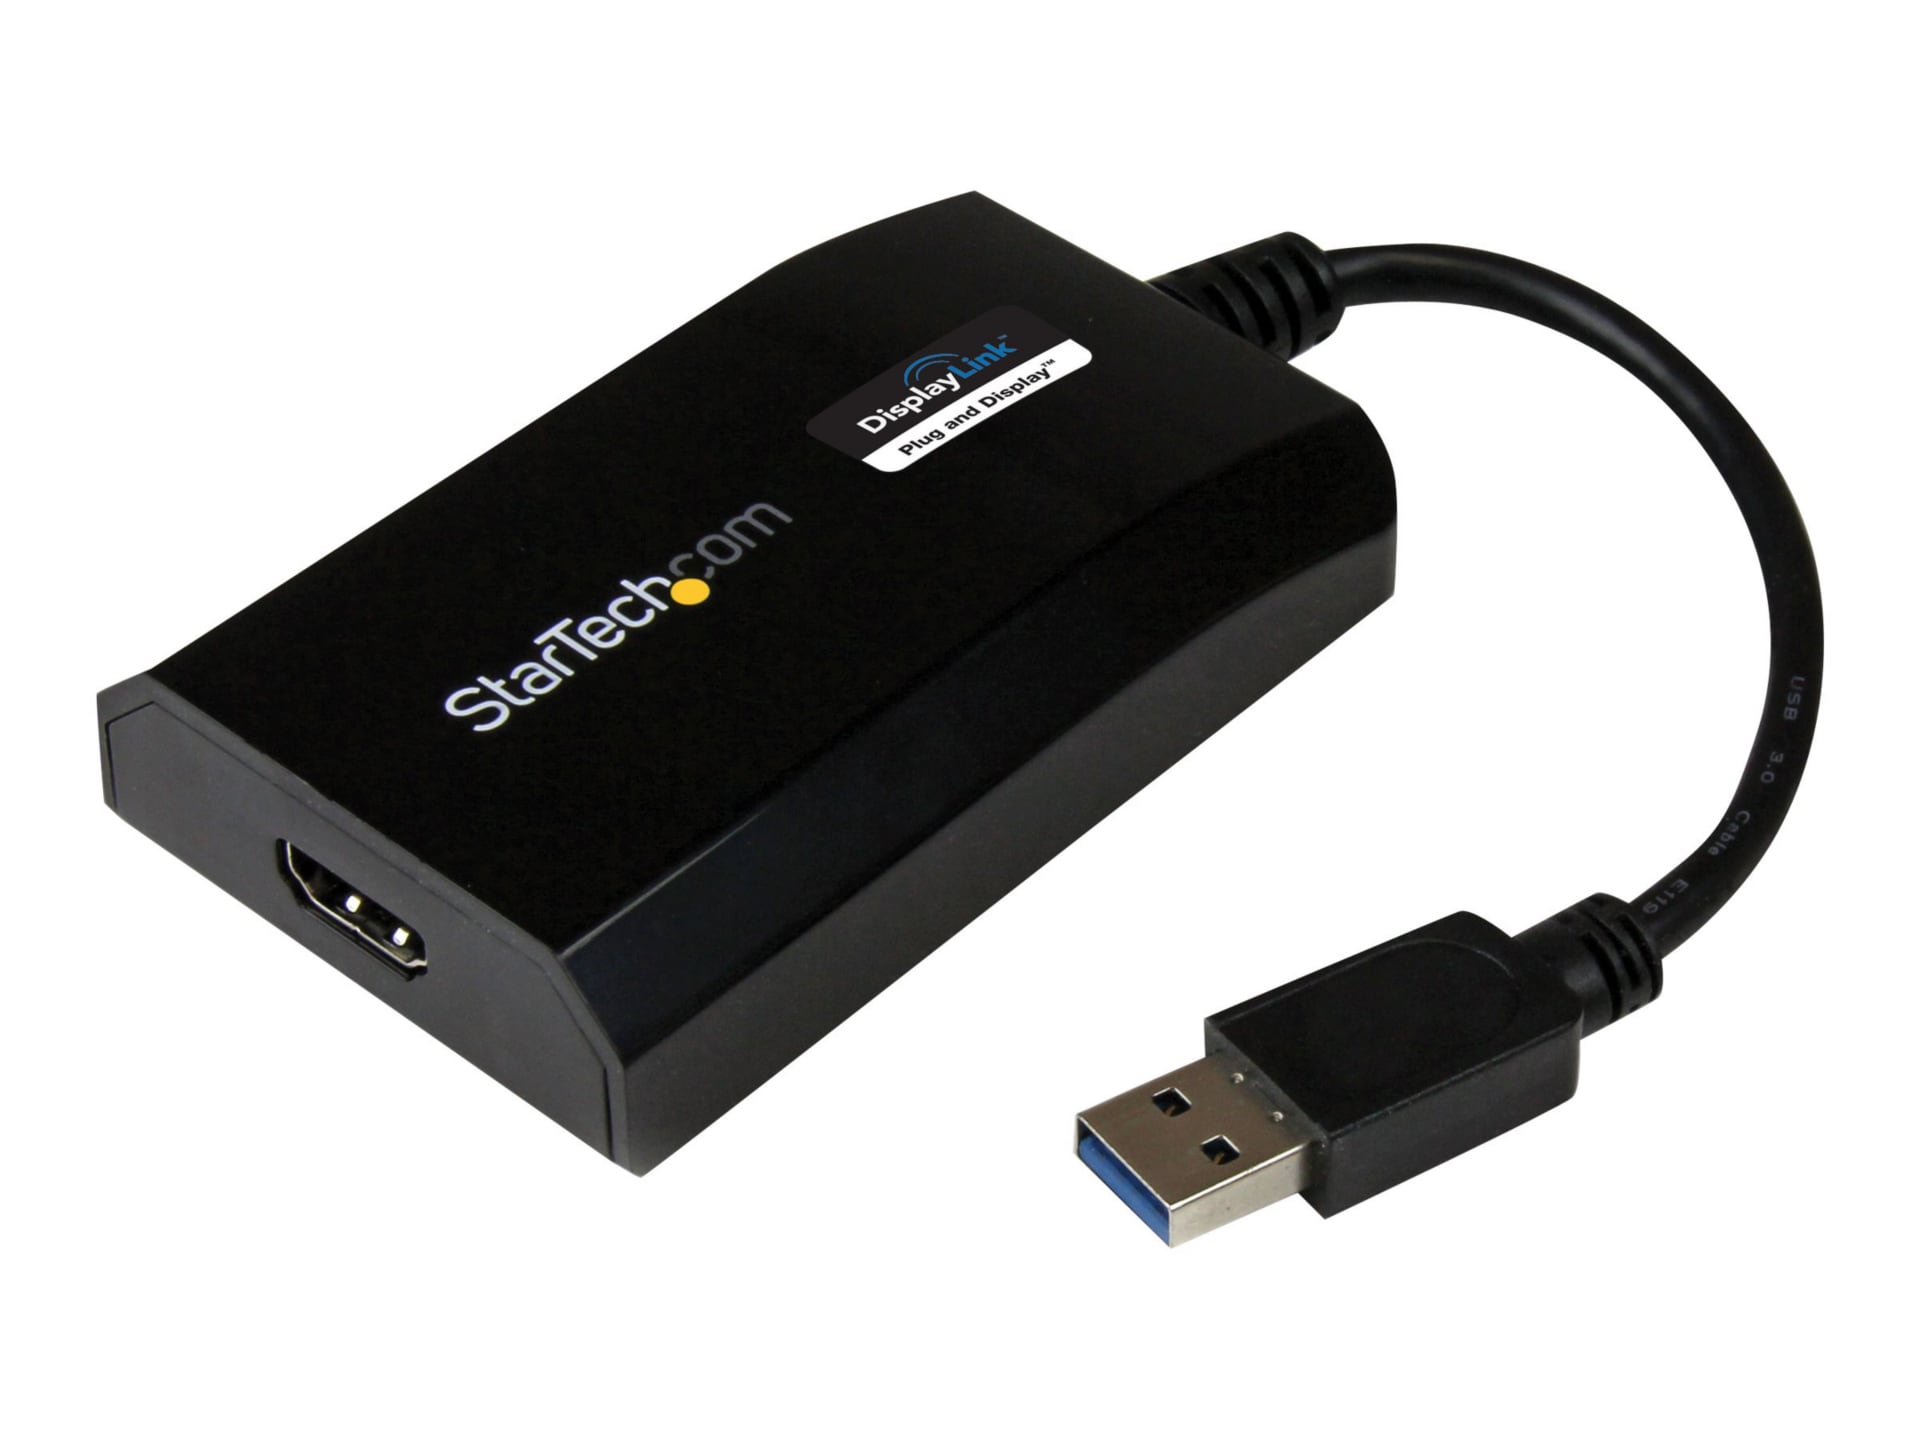 StarTech.com USB 3.0 to HDMI Video Card Adapter - DisplayLink - 1920x1200 - MultiMonitor Graphics - USB32HDPRO - Graphic Cards CDW.ca